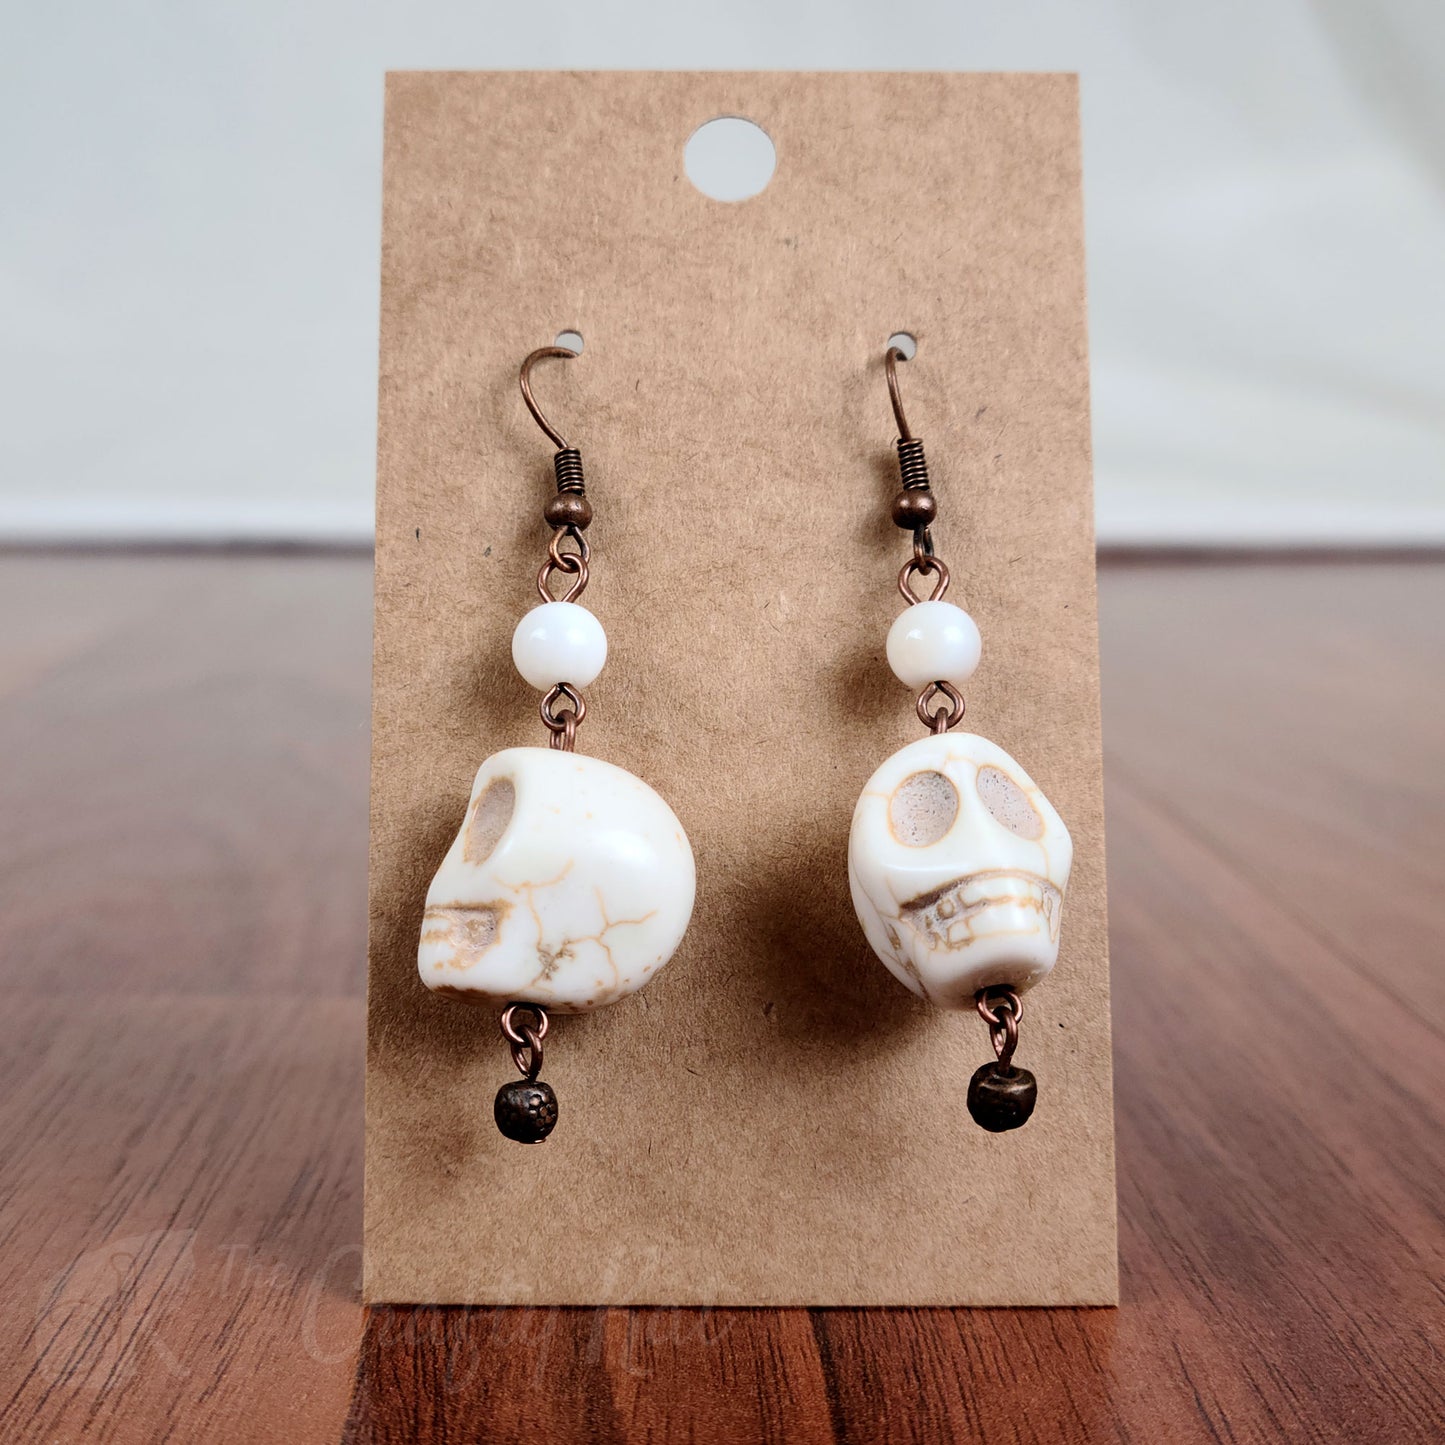 White stone skull earrings with antique copper hardware